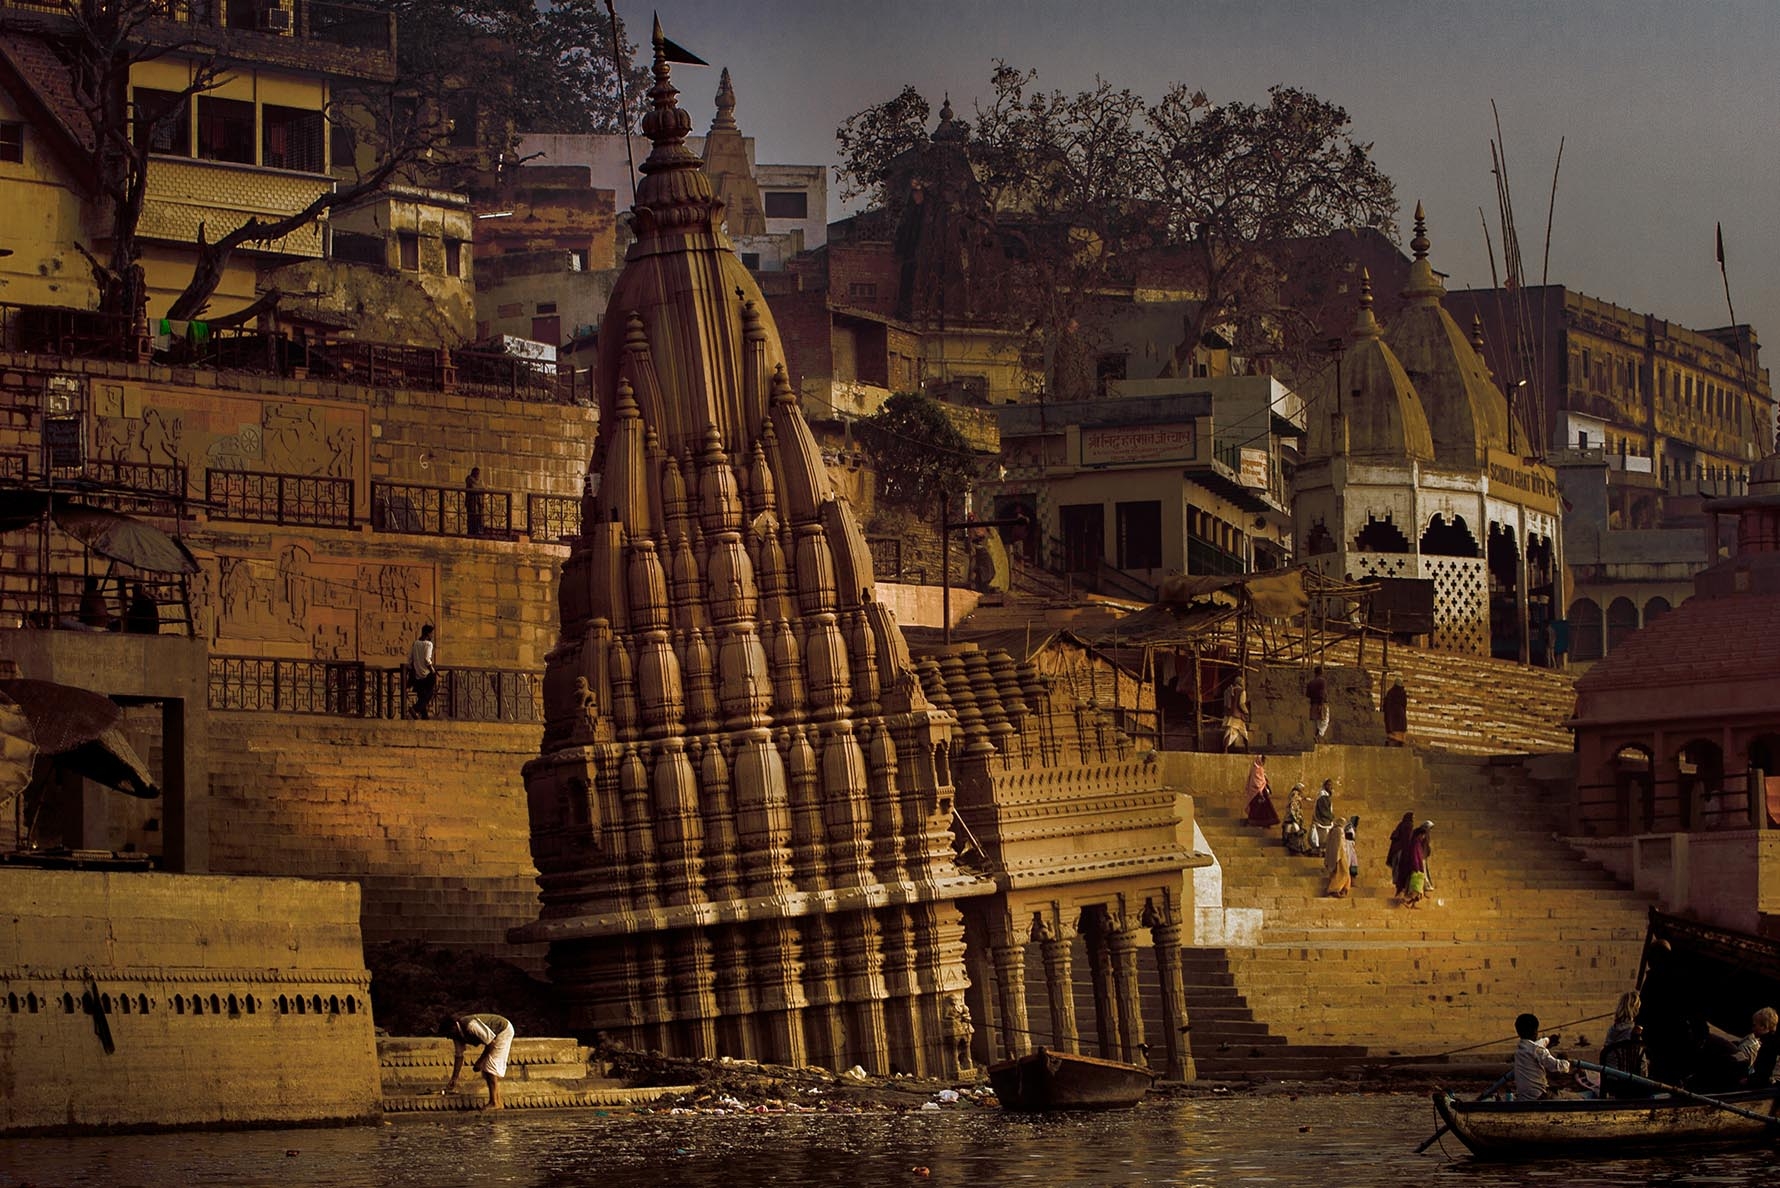 River Ganges and Ghats in Varanasi